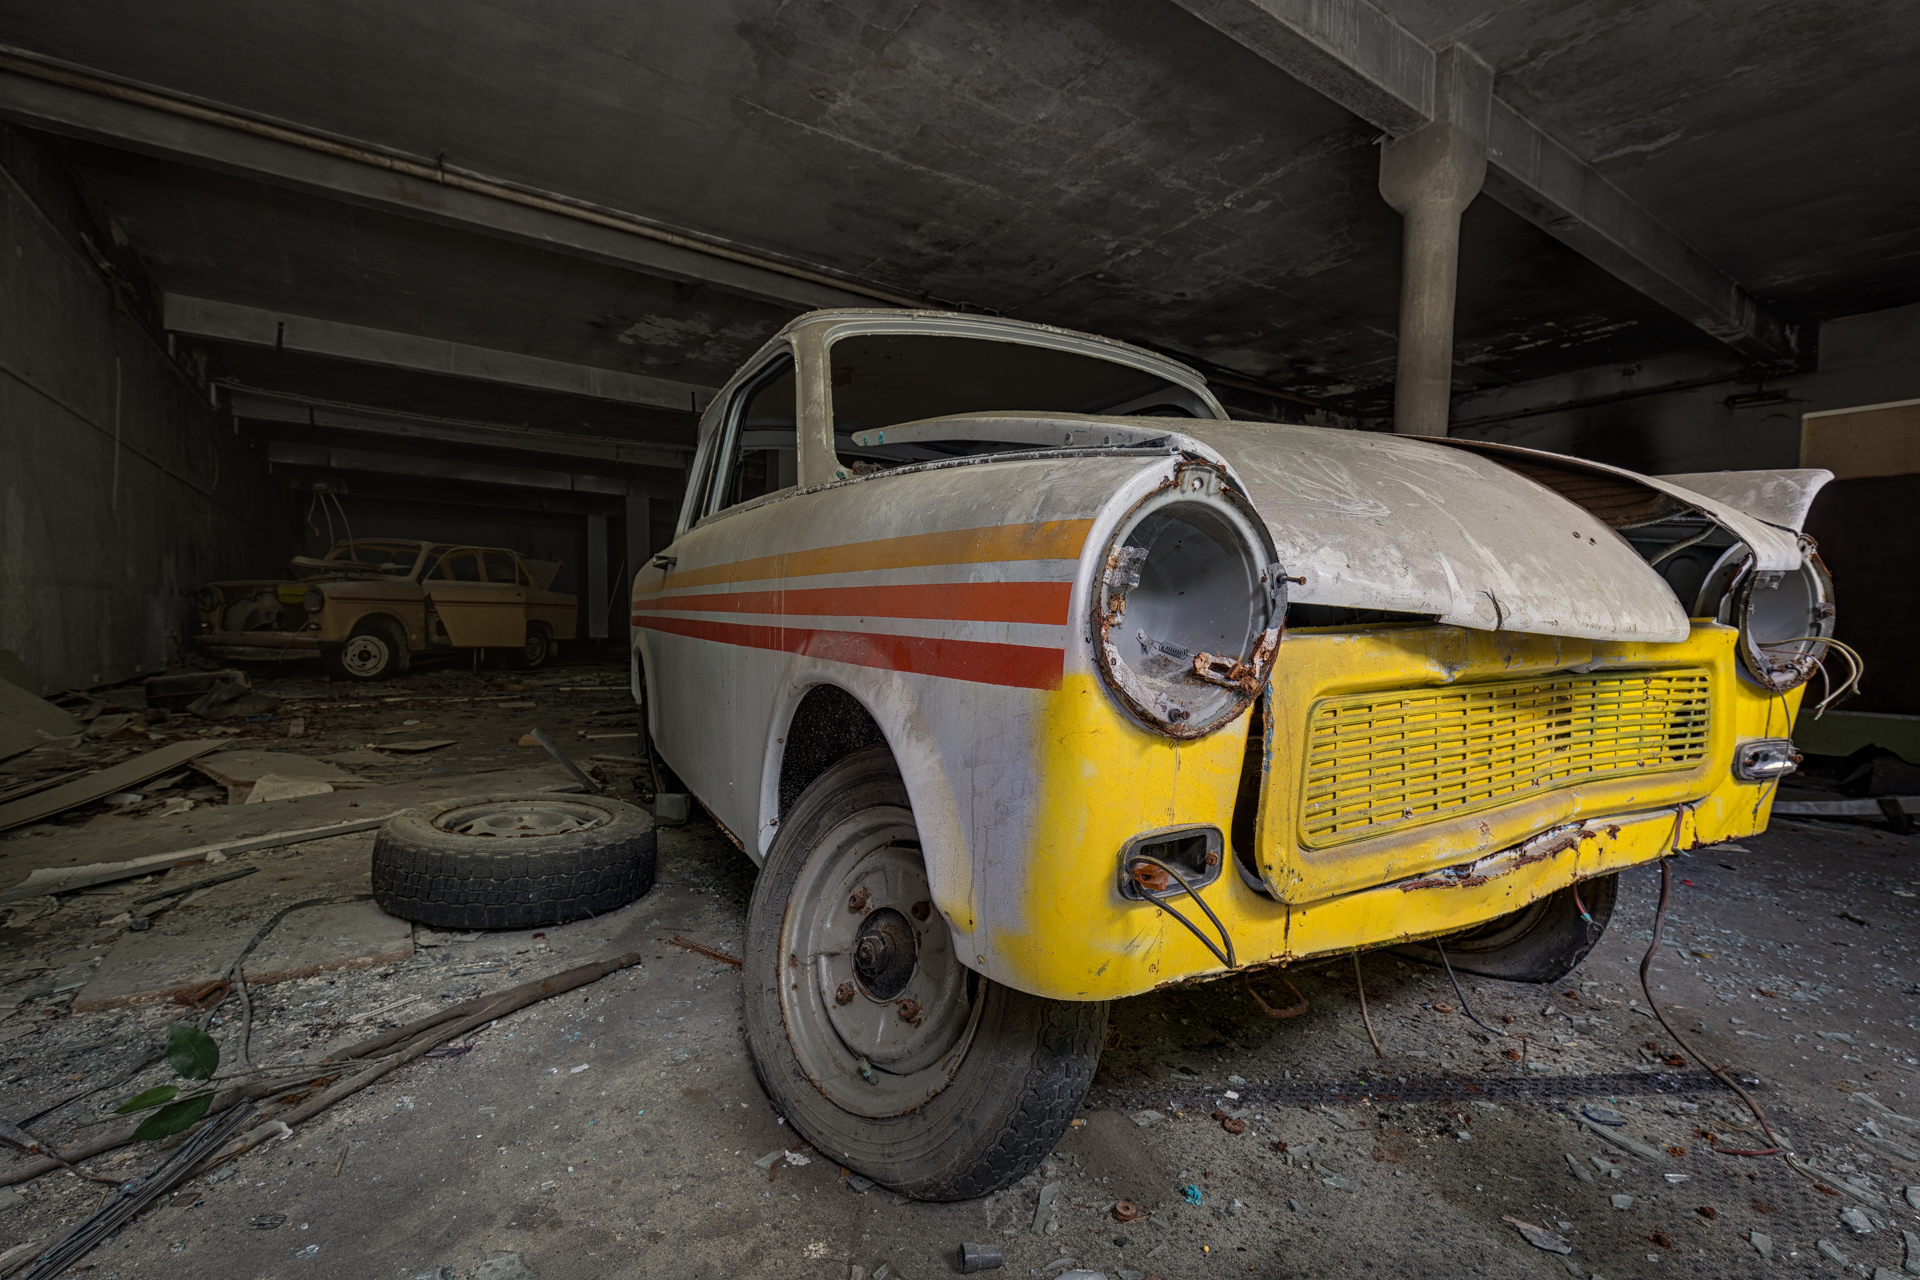 Urban Exploration - VAB Trabant - Icons of the Past